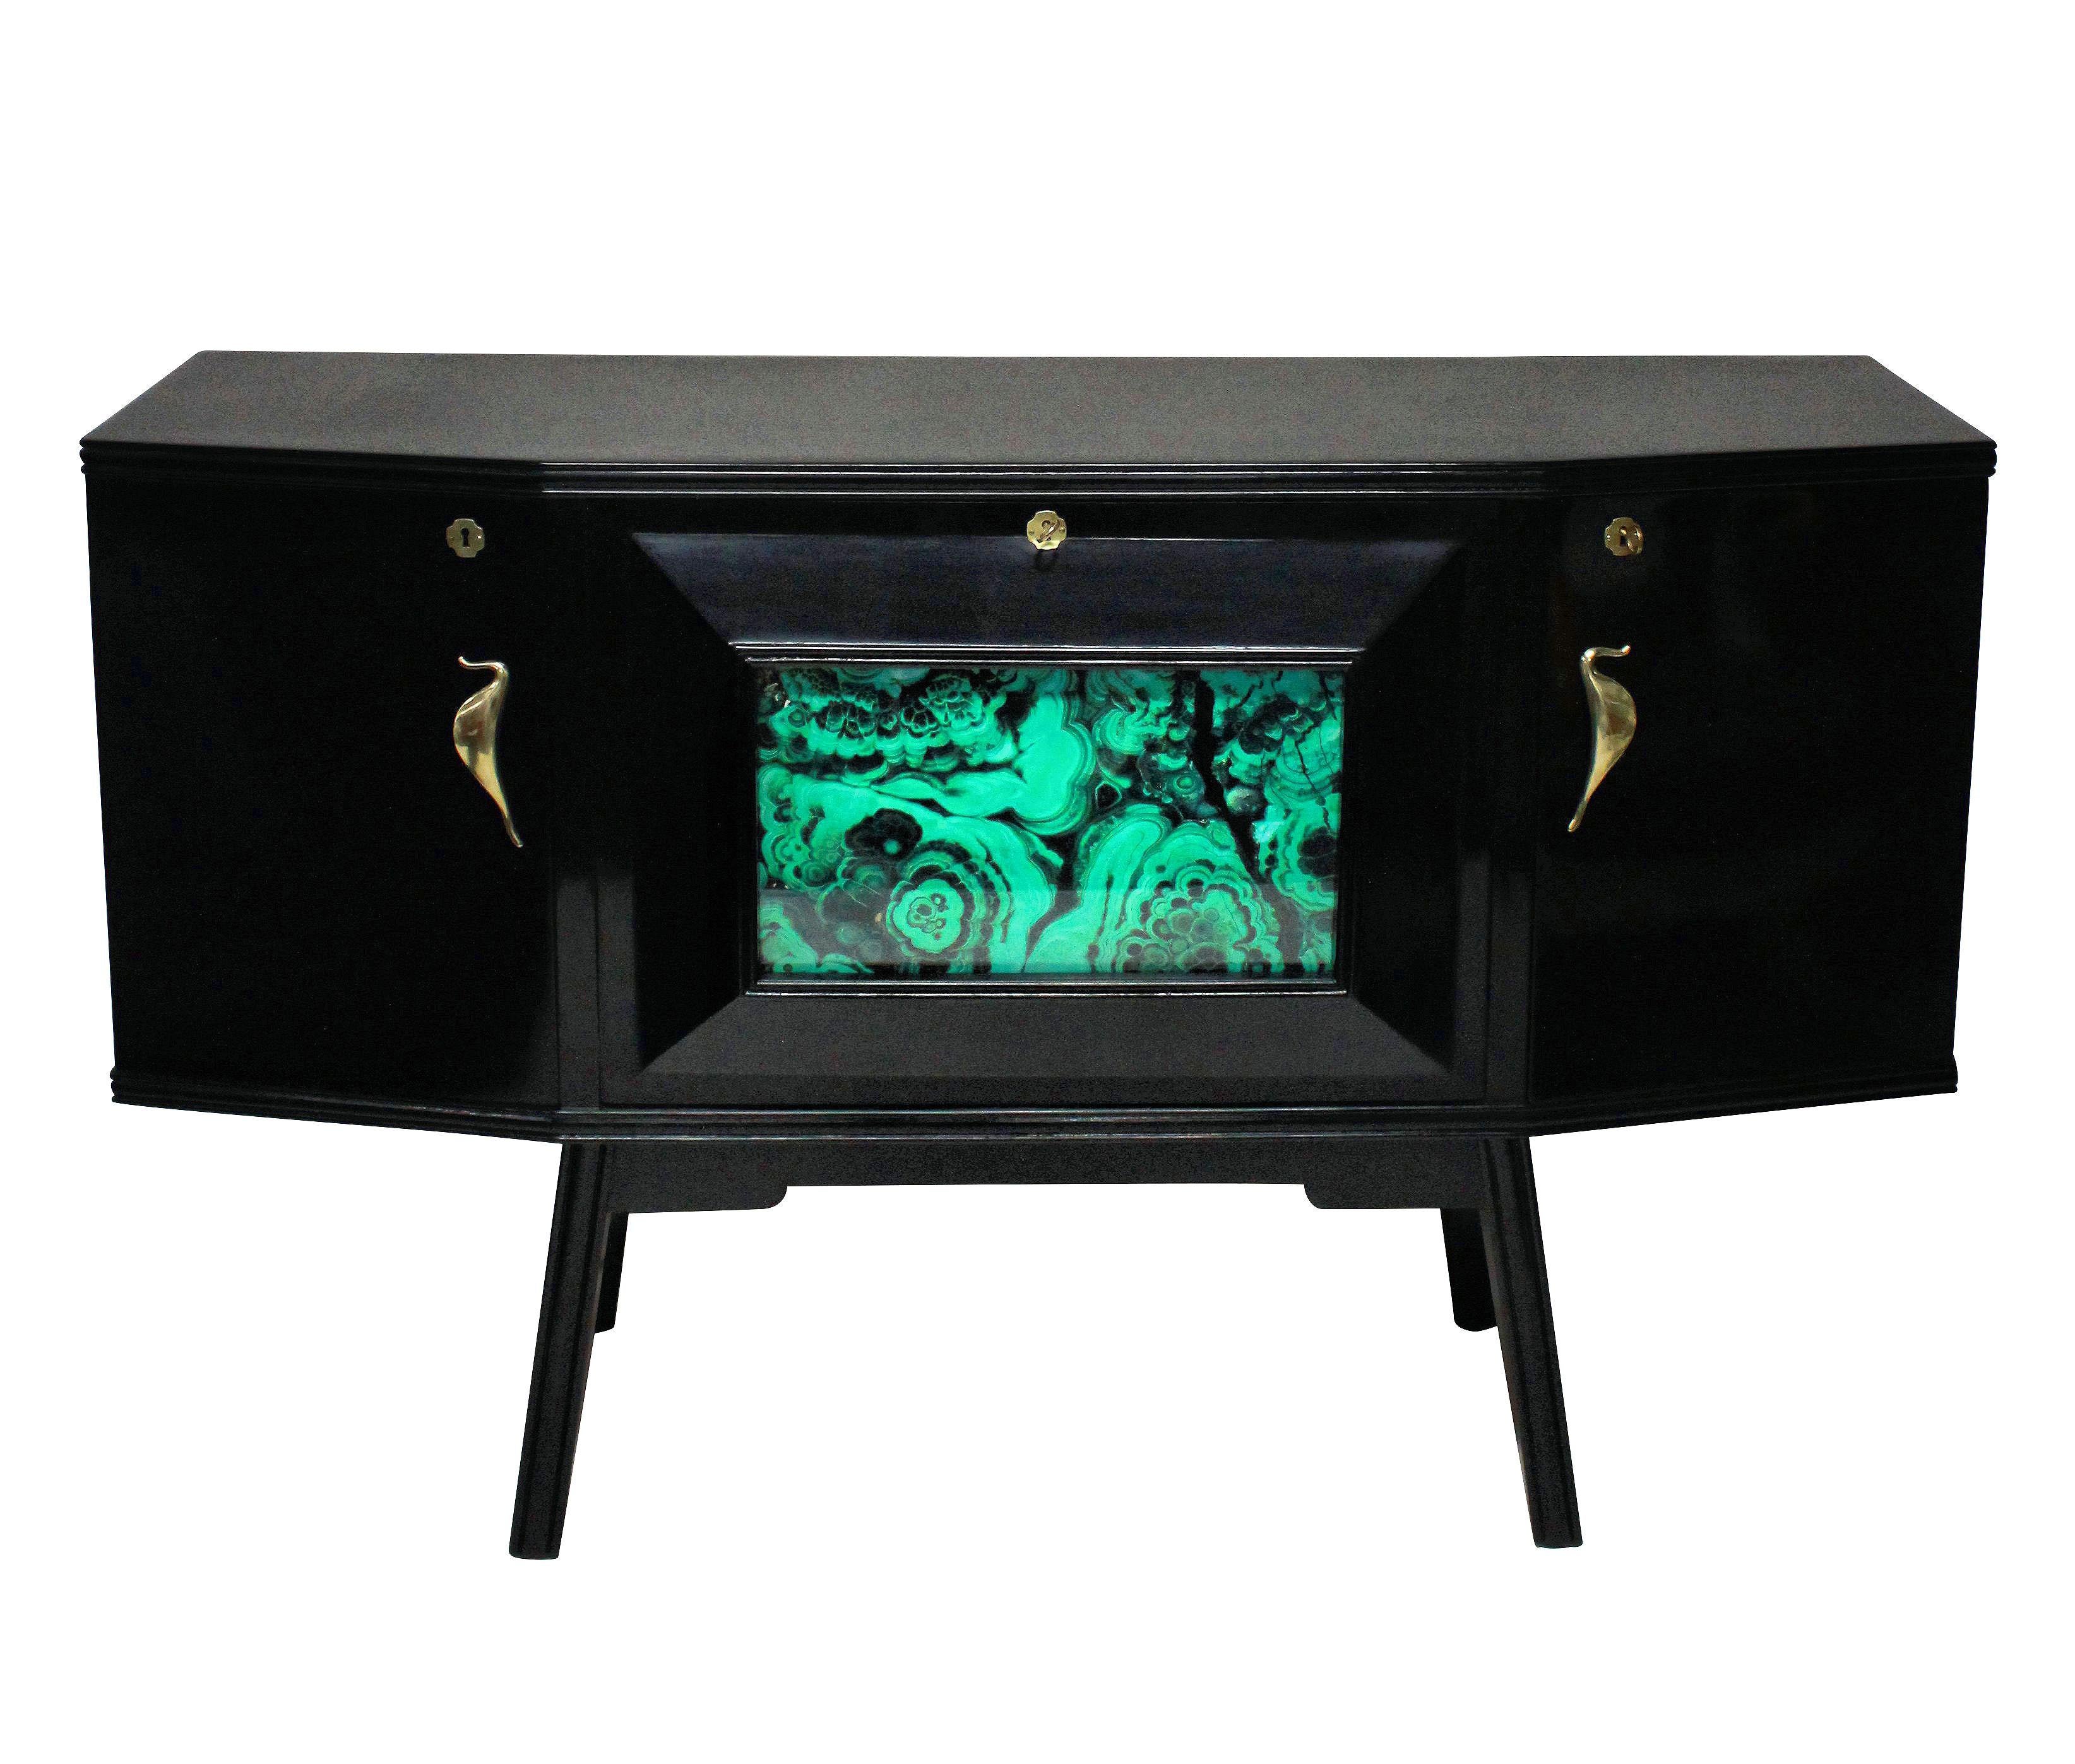 A stylish Italian bar credenza of interesting angular design in black lacquer with sepele wood interior, with brass hardware and a faux malachite central panel and mirrored interior.

        